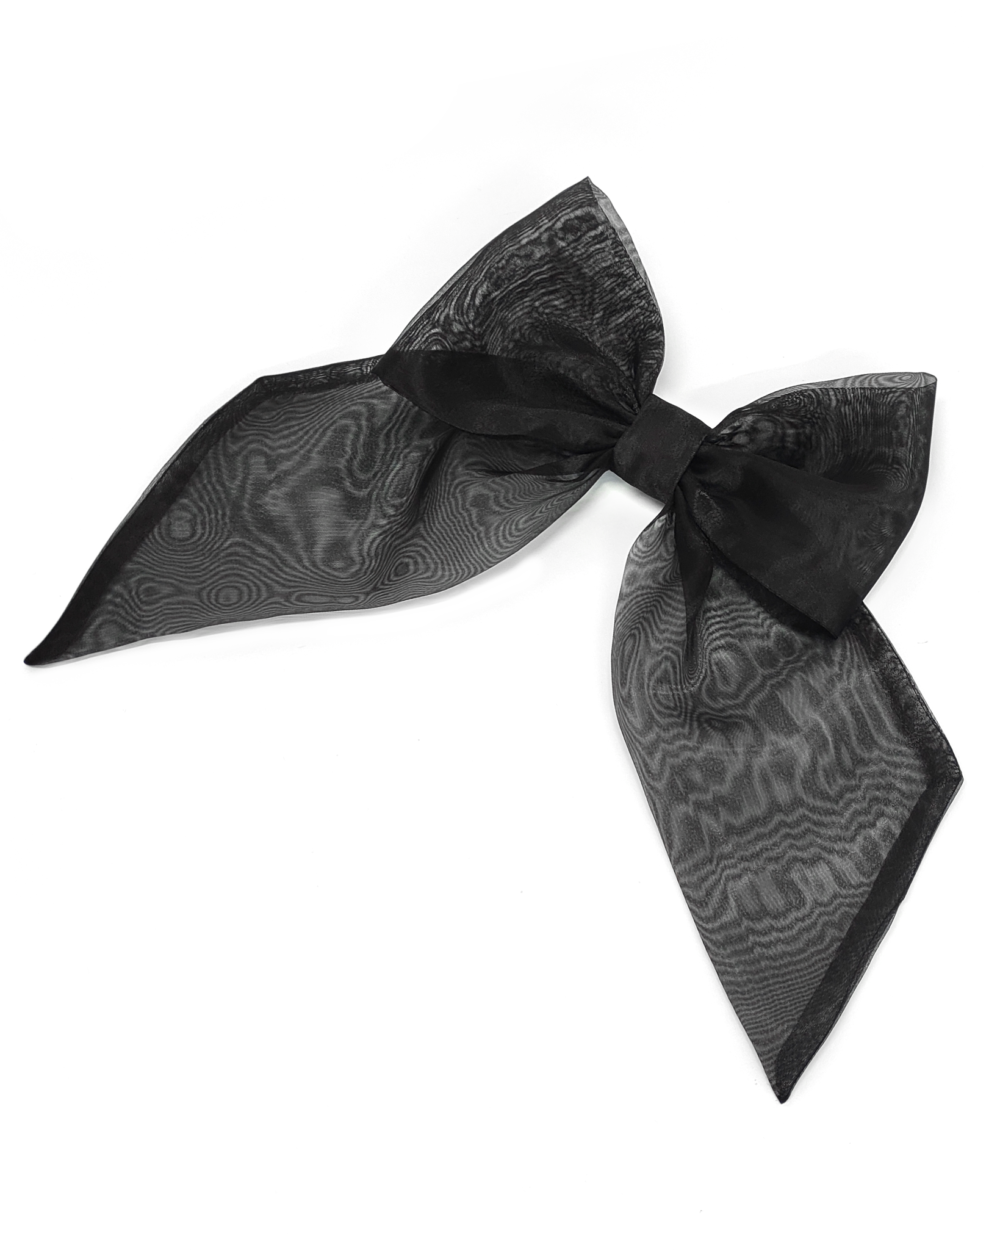 Black brooch in the shape of a giant bow made of organza by melikestea.